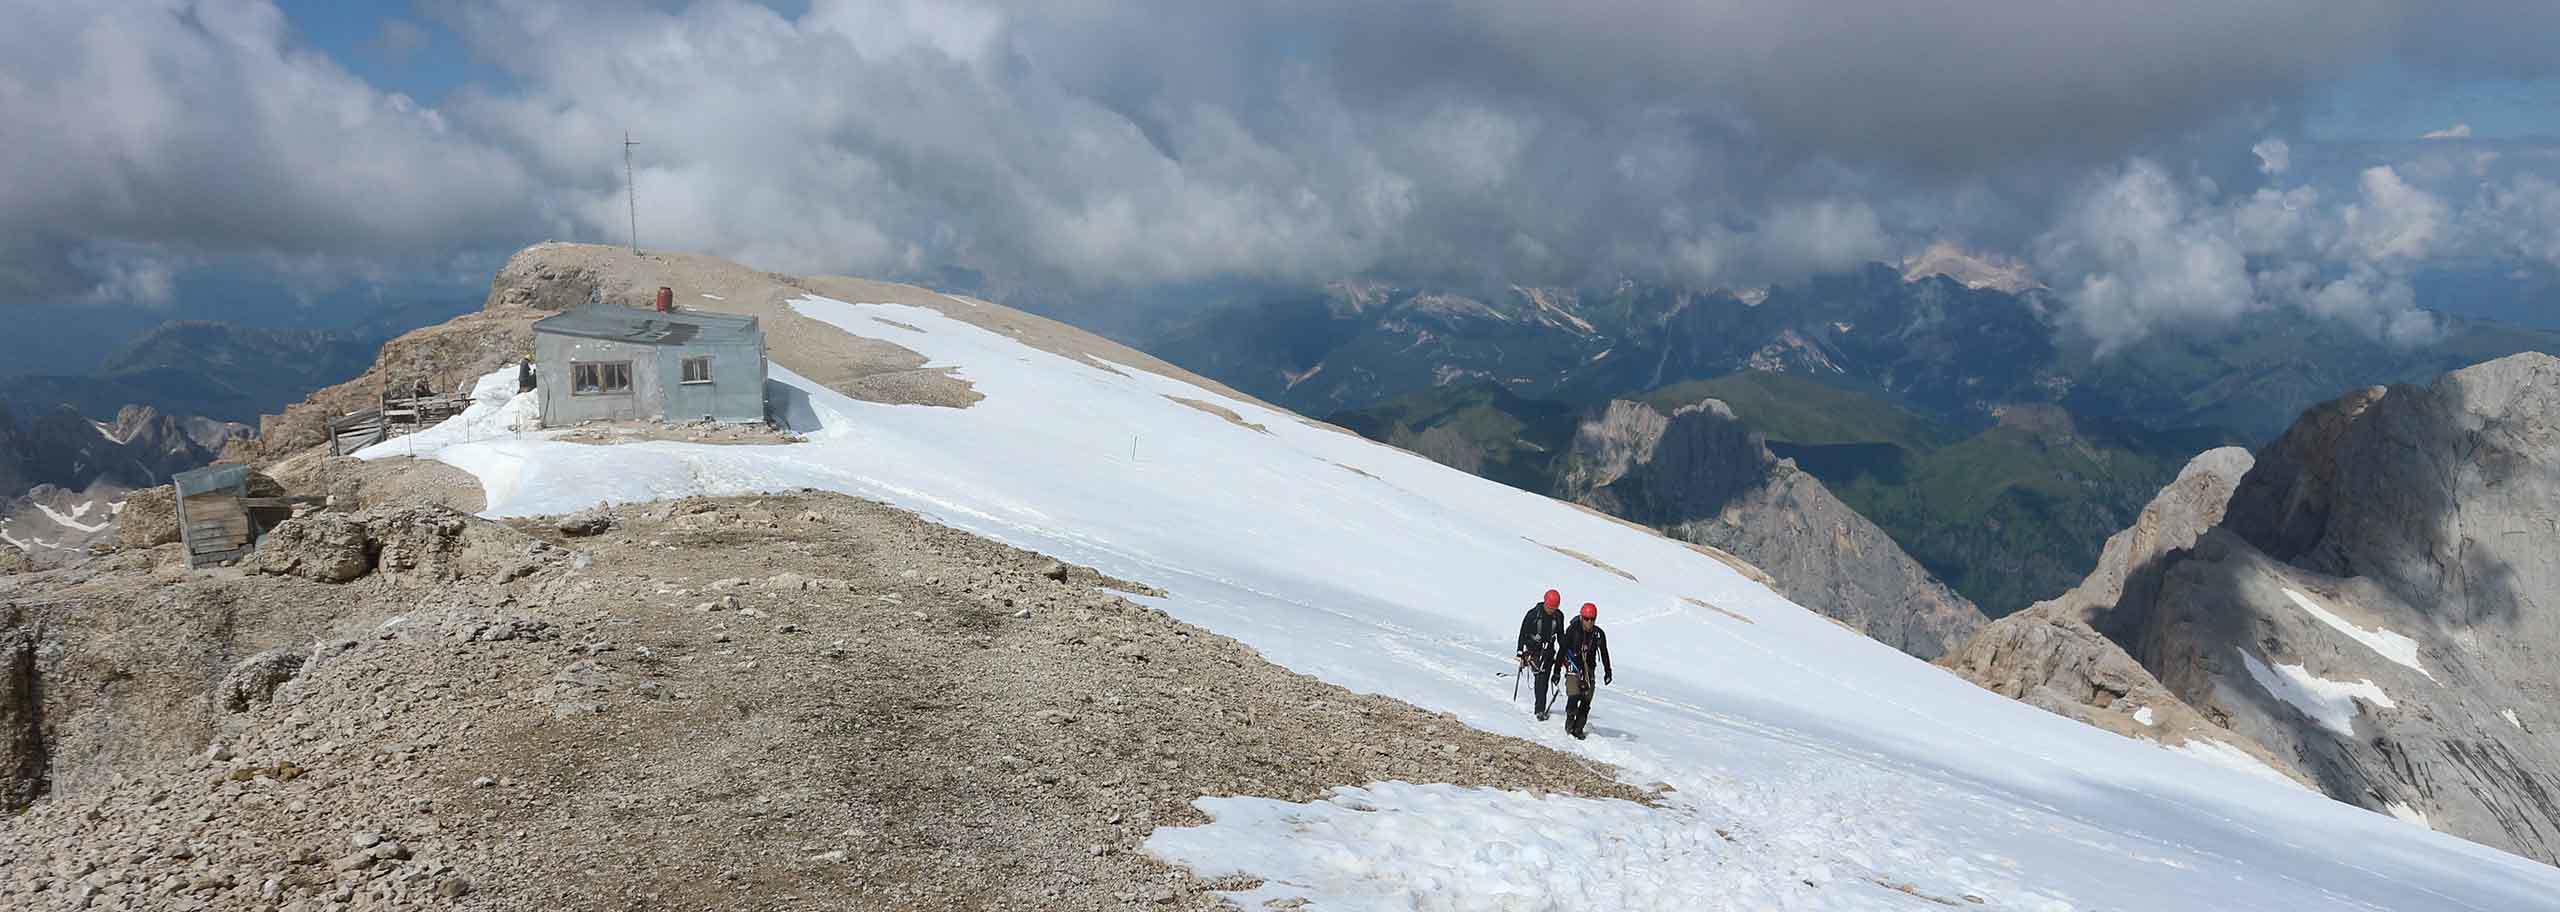 Mountain Climbing in Marmolada, Guided Mountaineering Experience